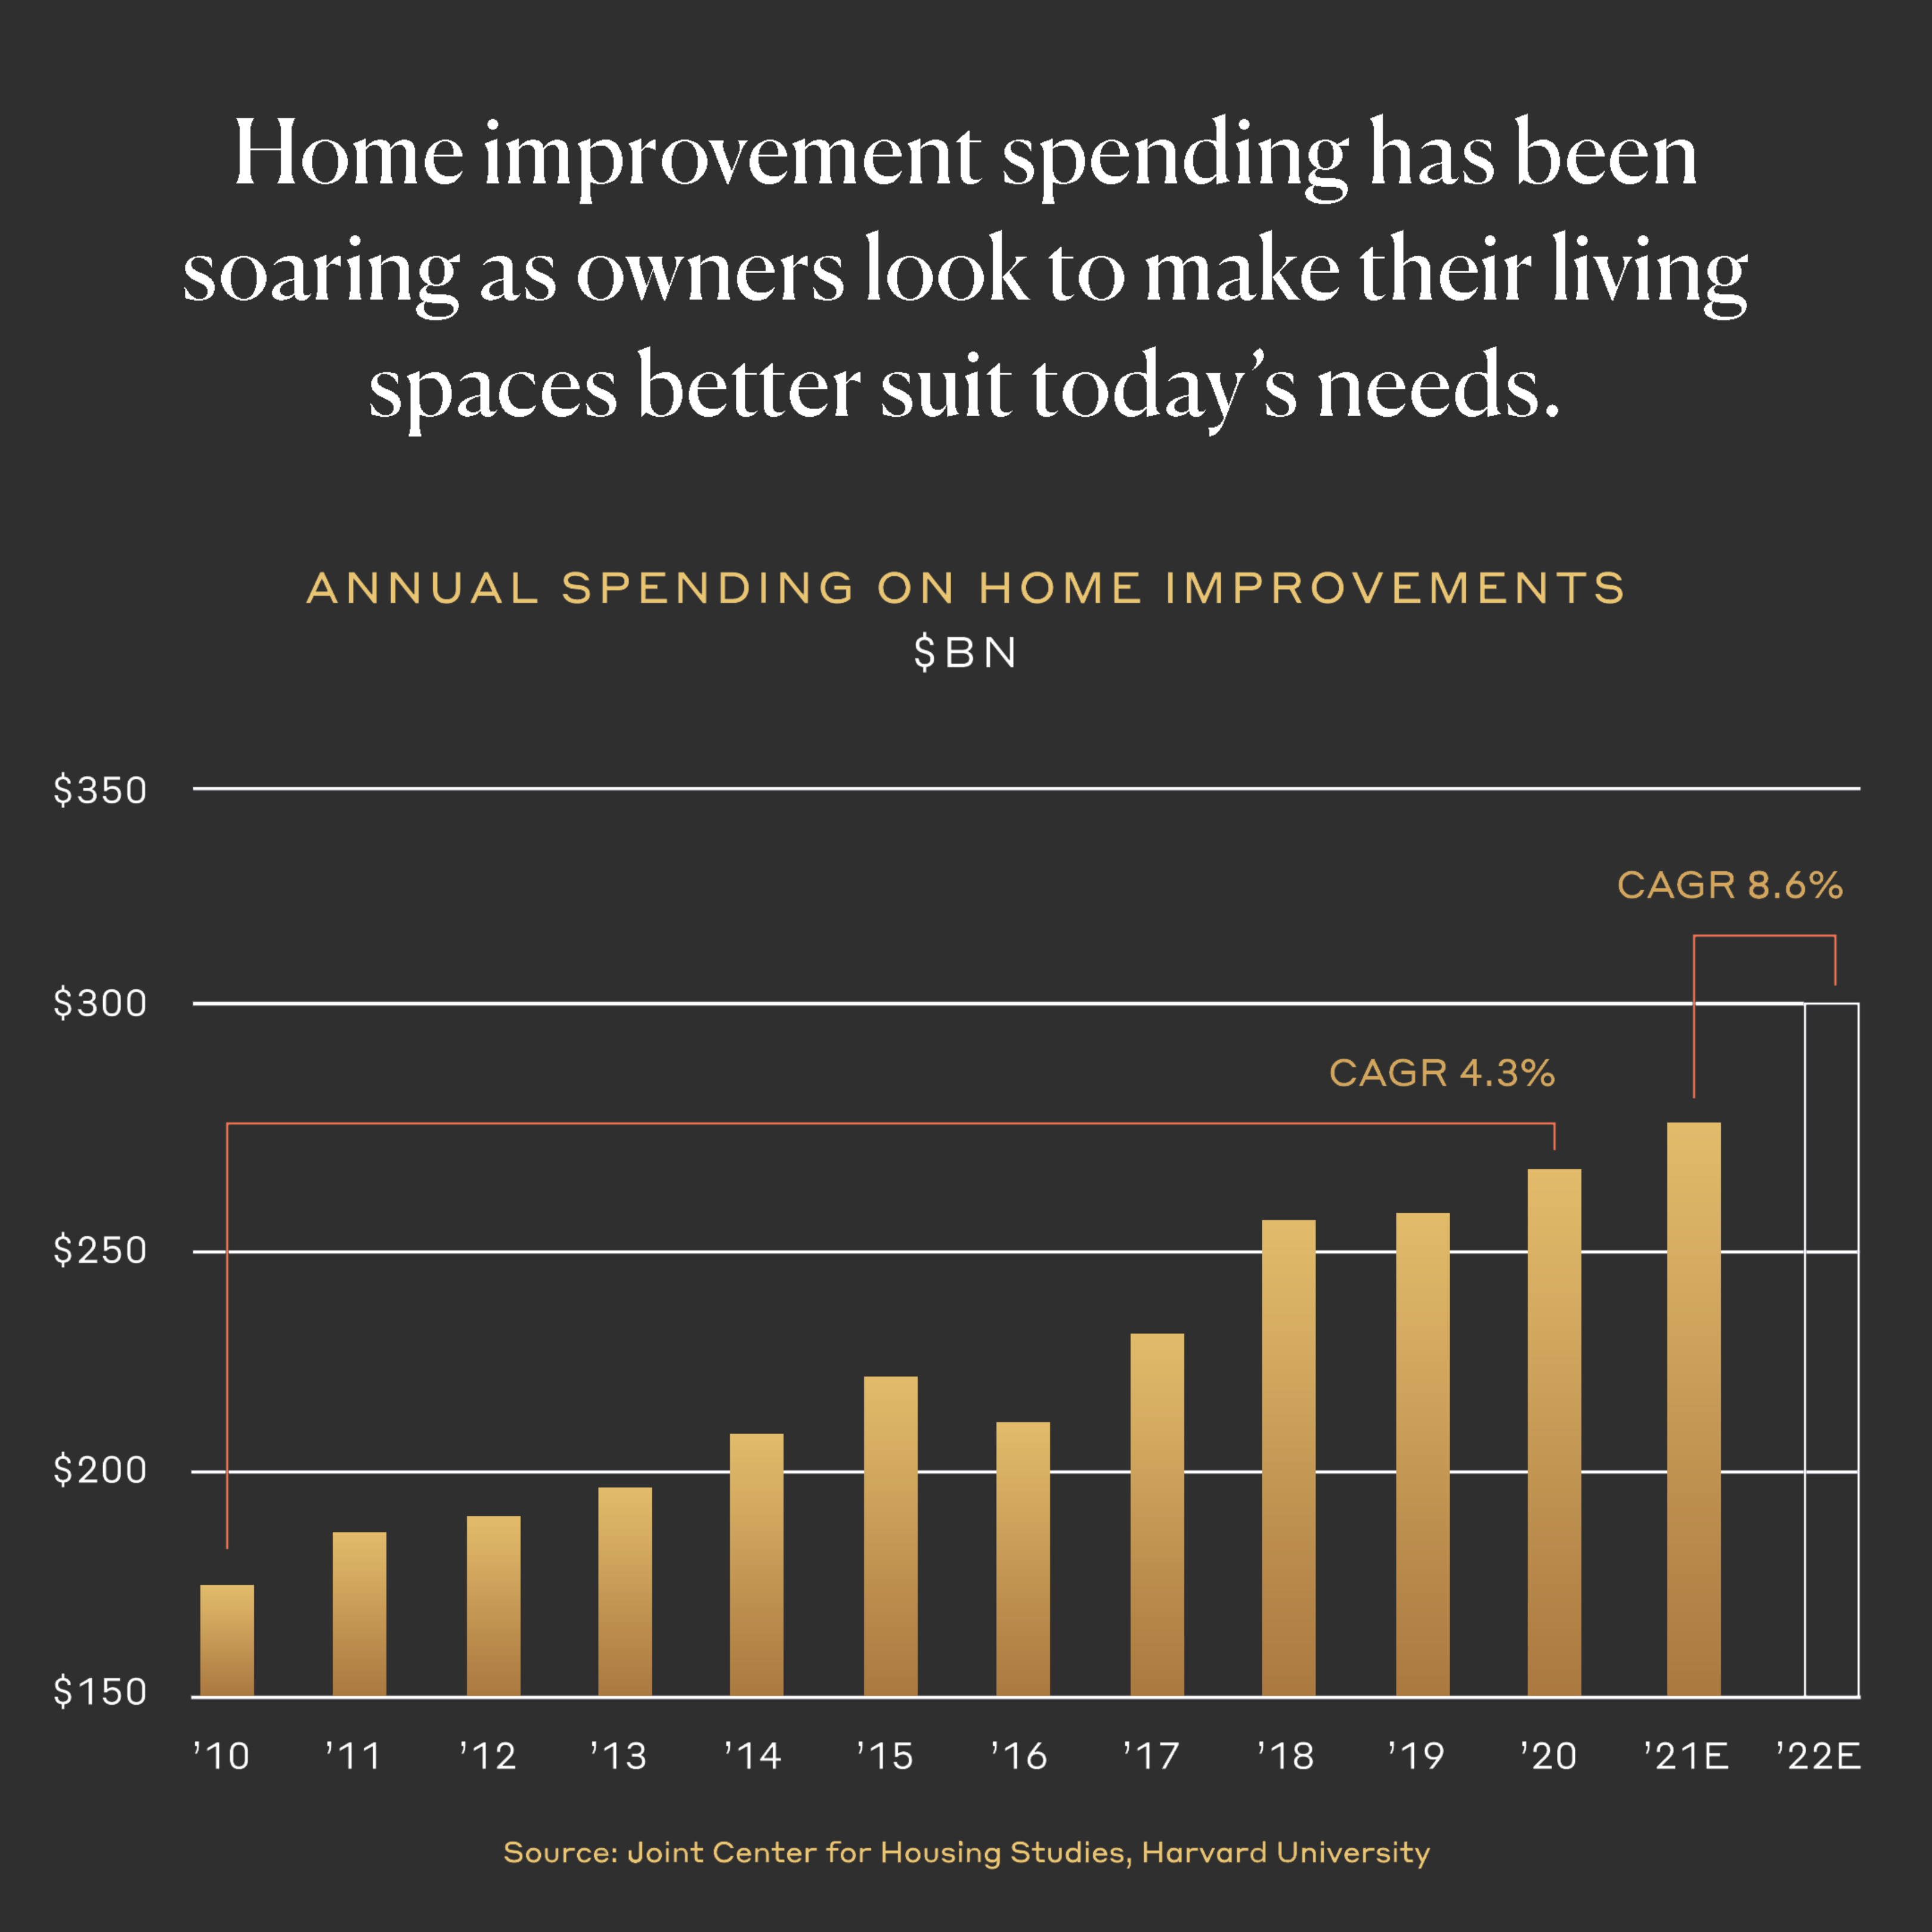 Home improvement spending has been soaring as owners look to make their living spaces better suit today's needs.